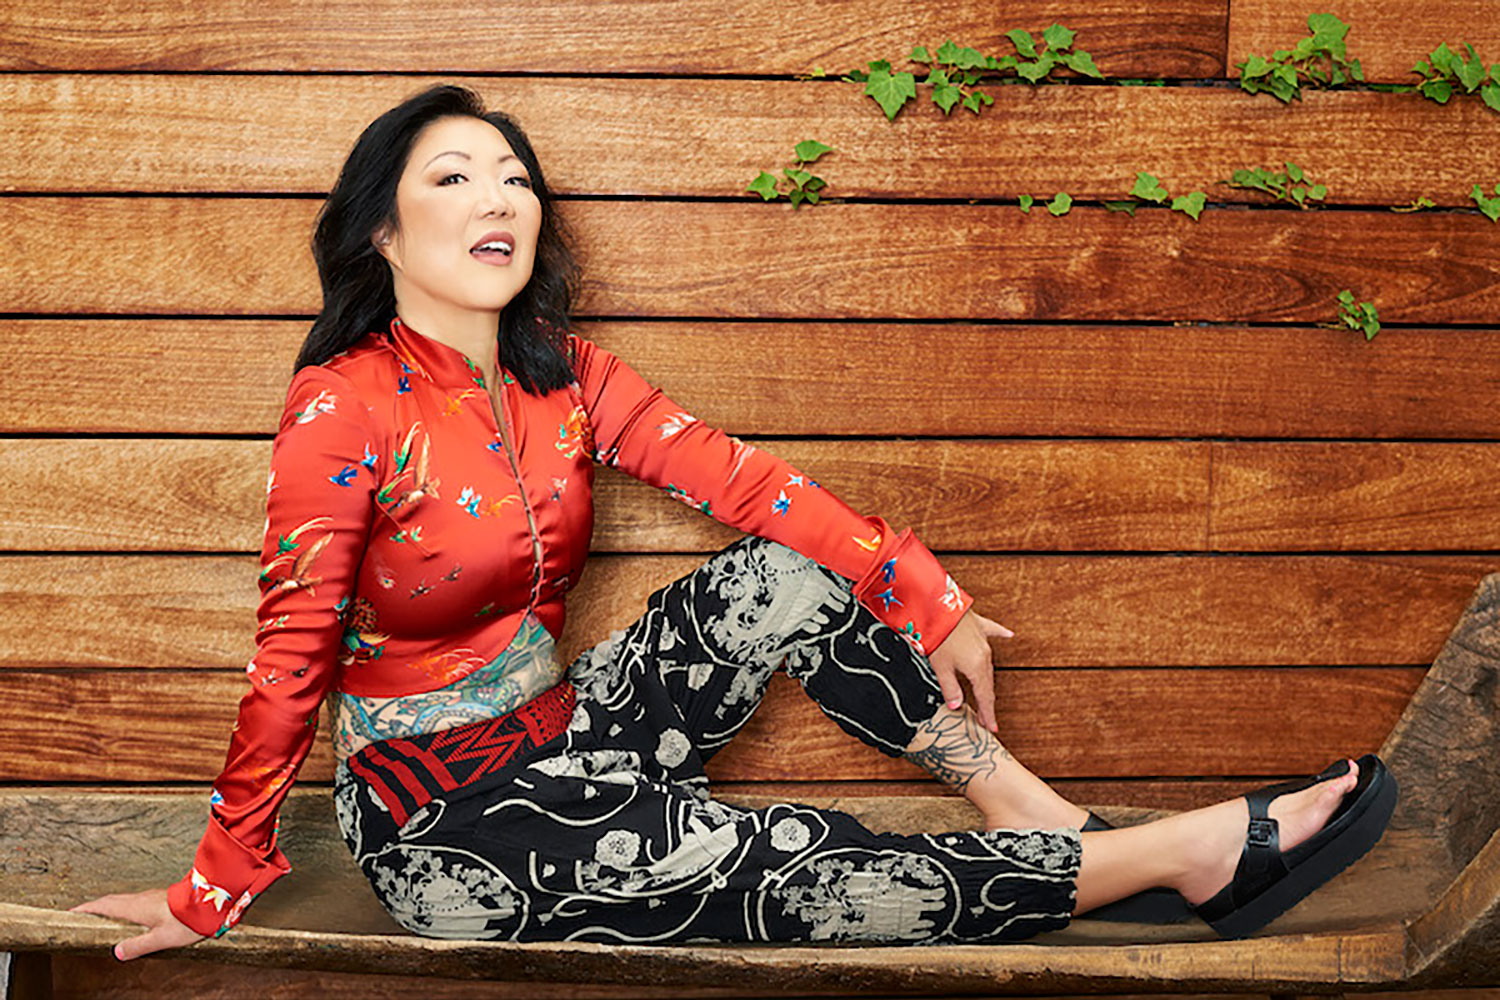 Margaret Cho sitting on a wooden bench during an interview.